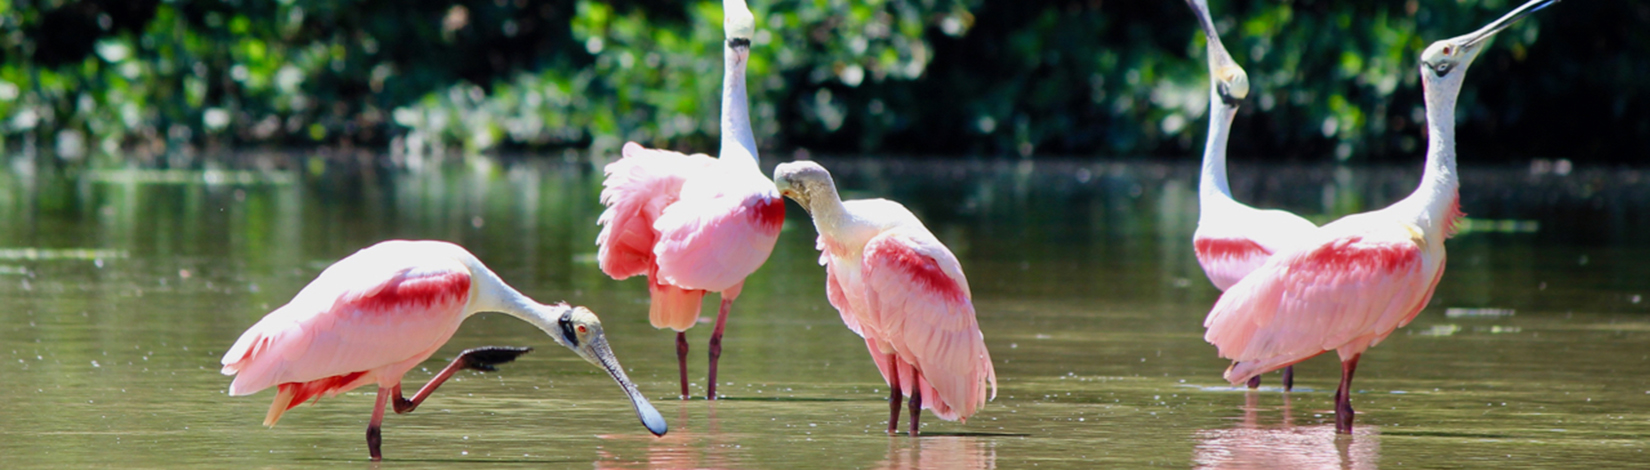 Photo of 4 spoonbills in shallow water